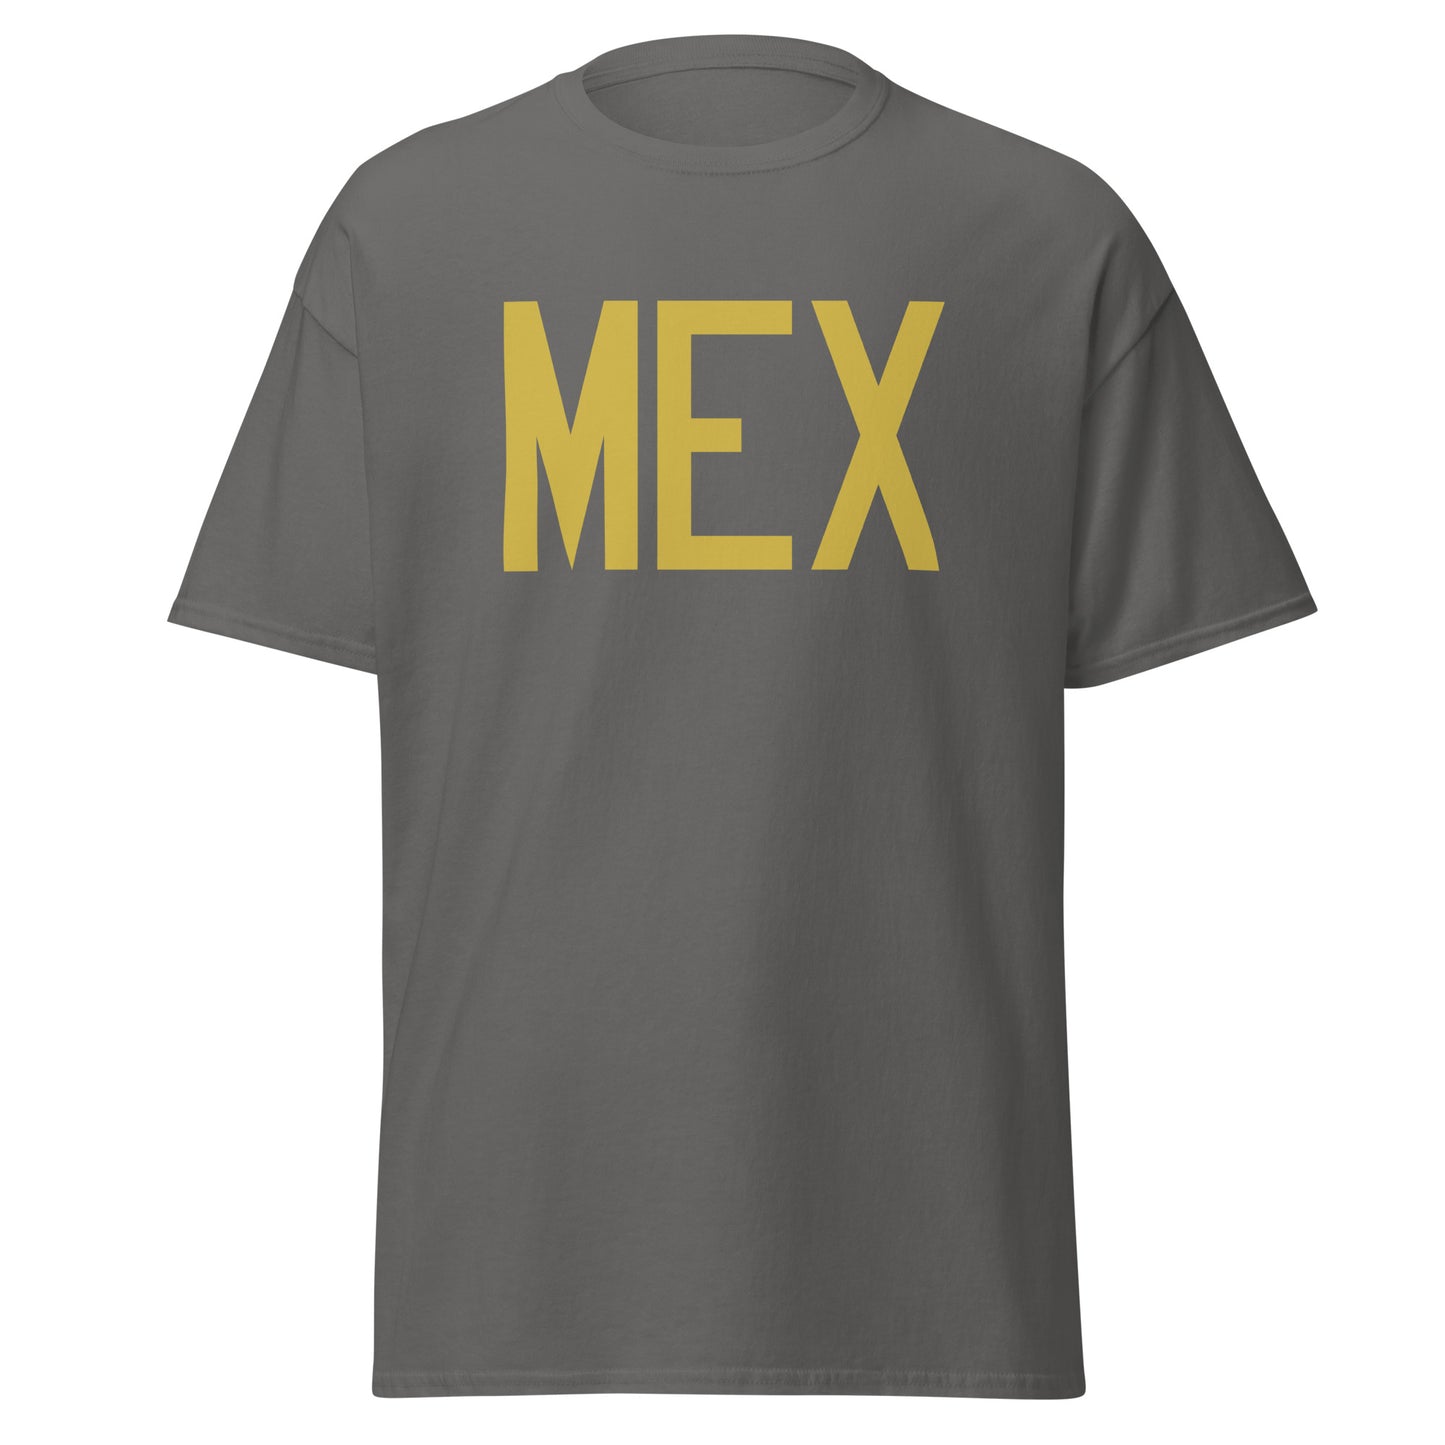 Aviation Enthusiast Men's Tee - Old Gold Graphic • MEX Mexico City • YHM Designs - Image 05